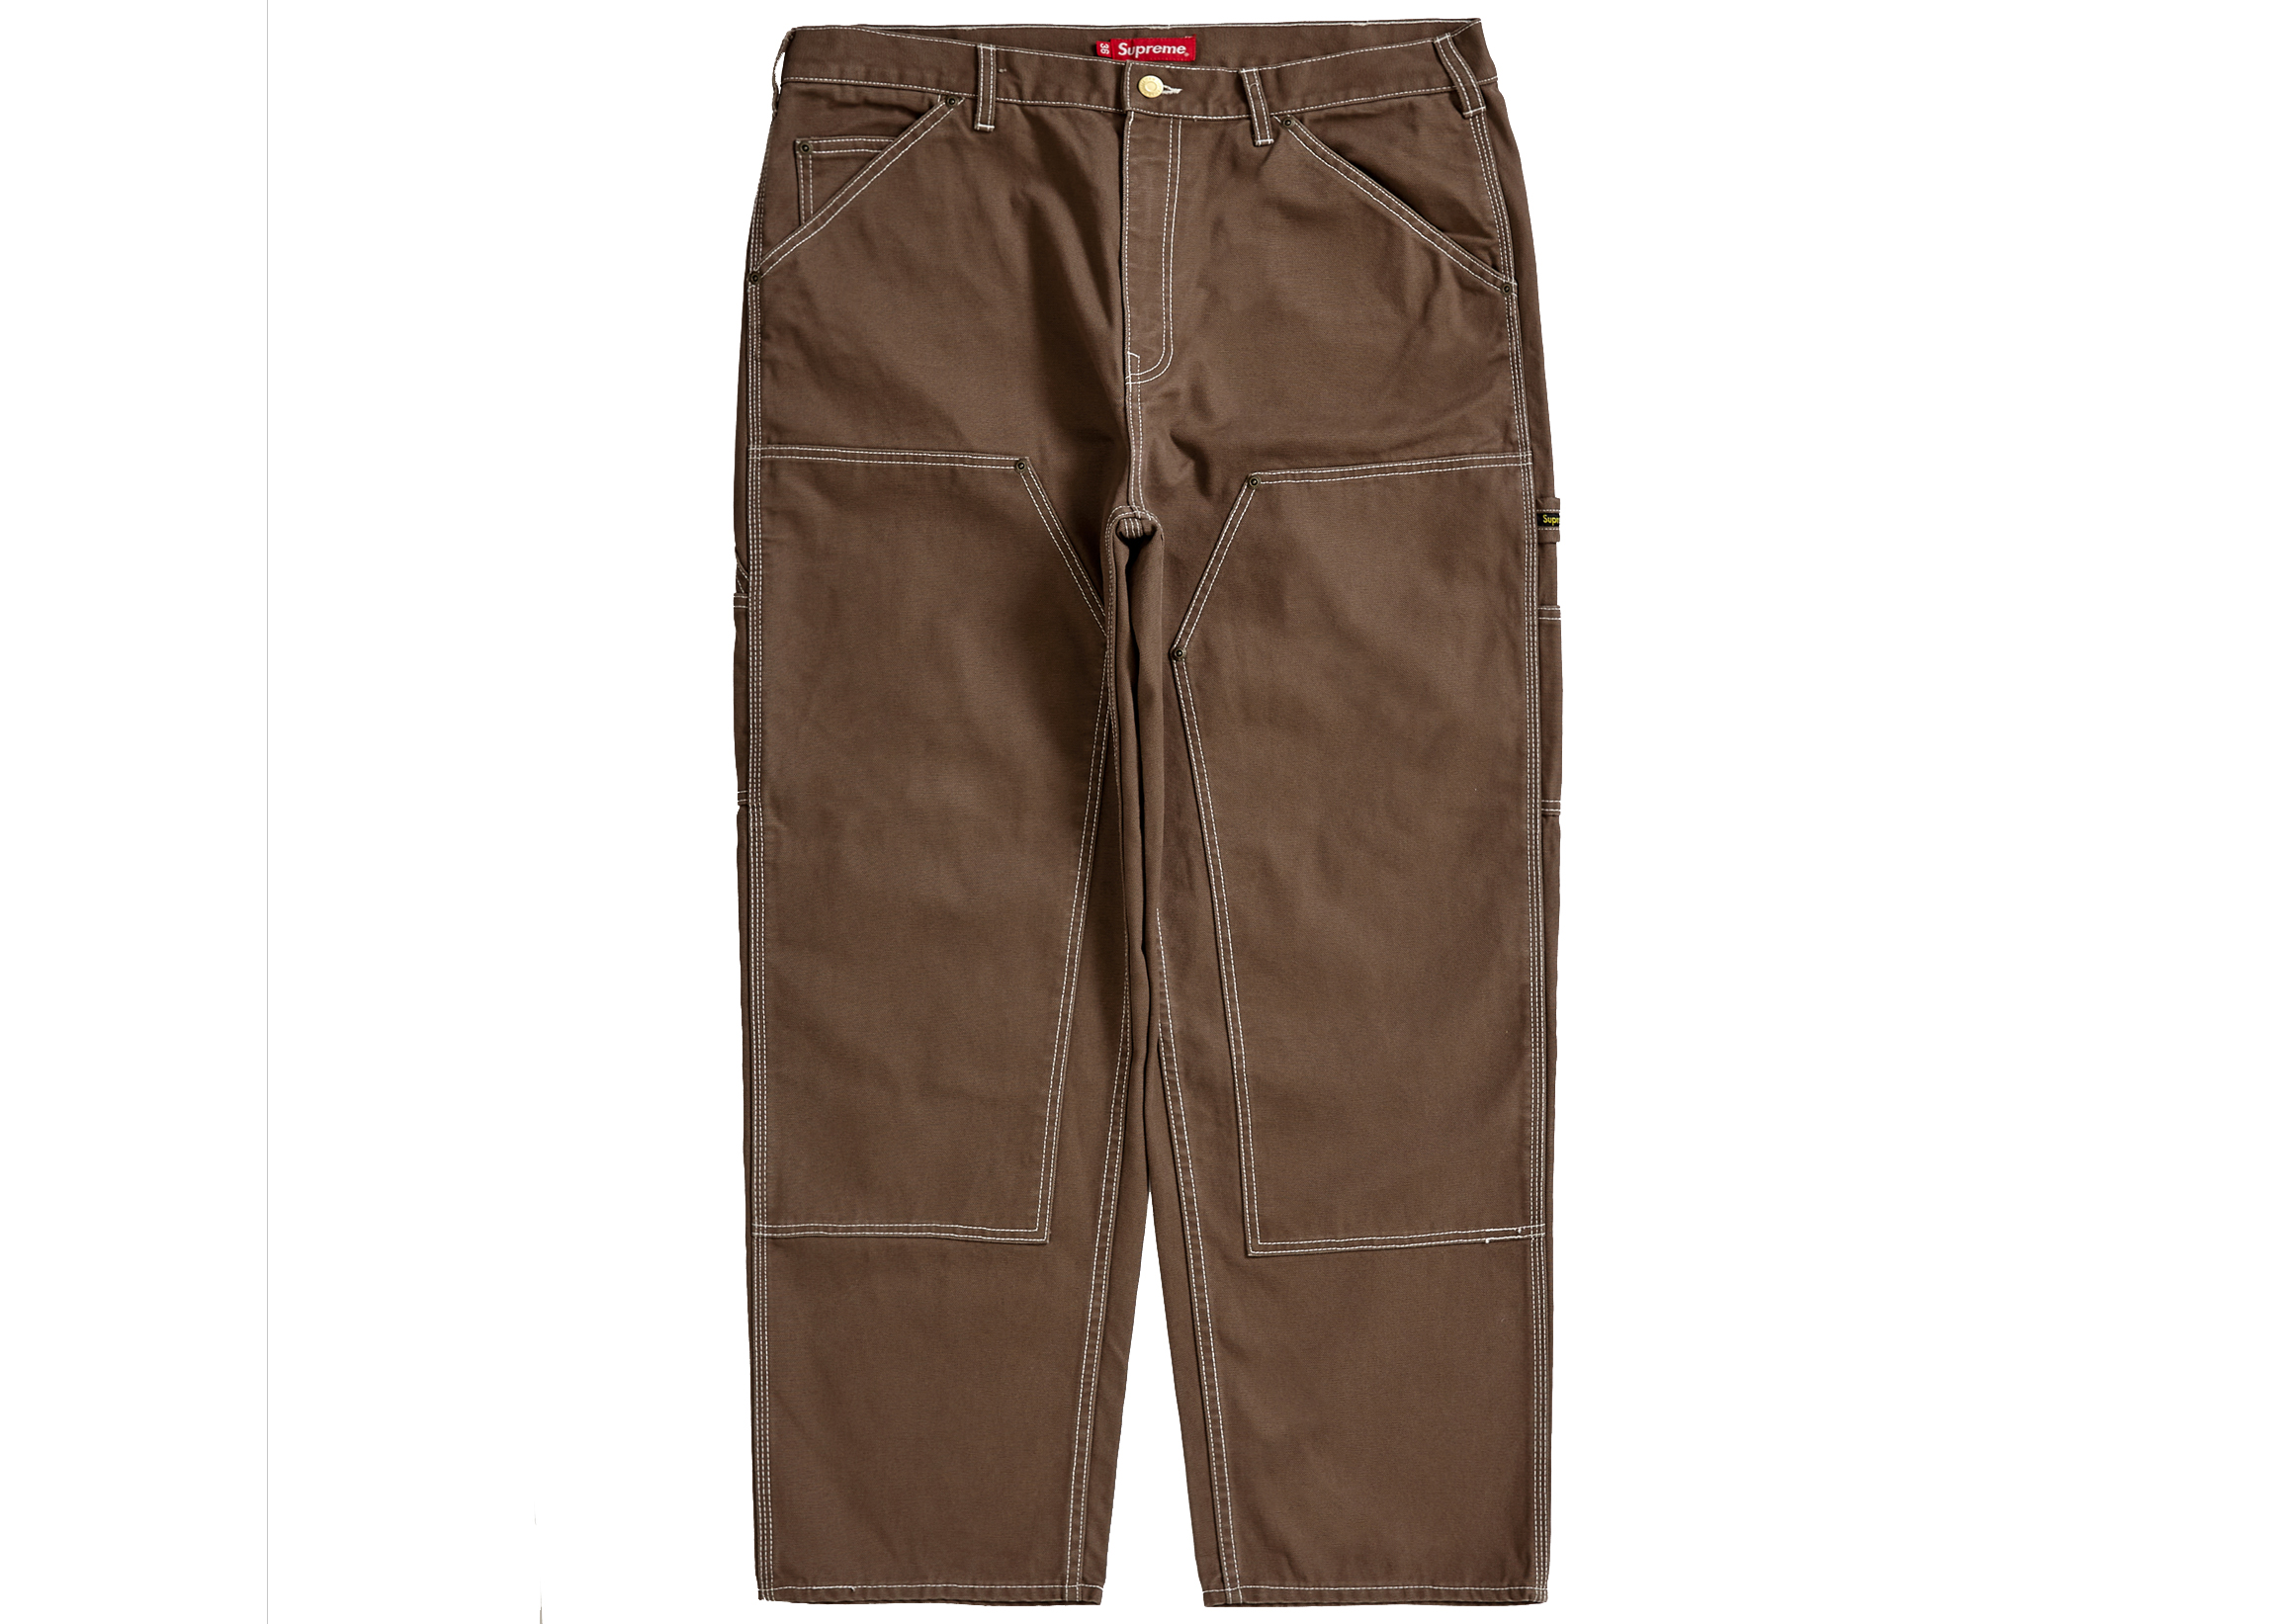 Supreme Leather Double Knee Painter Pant Tan